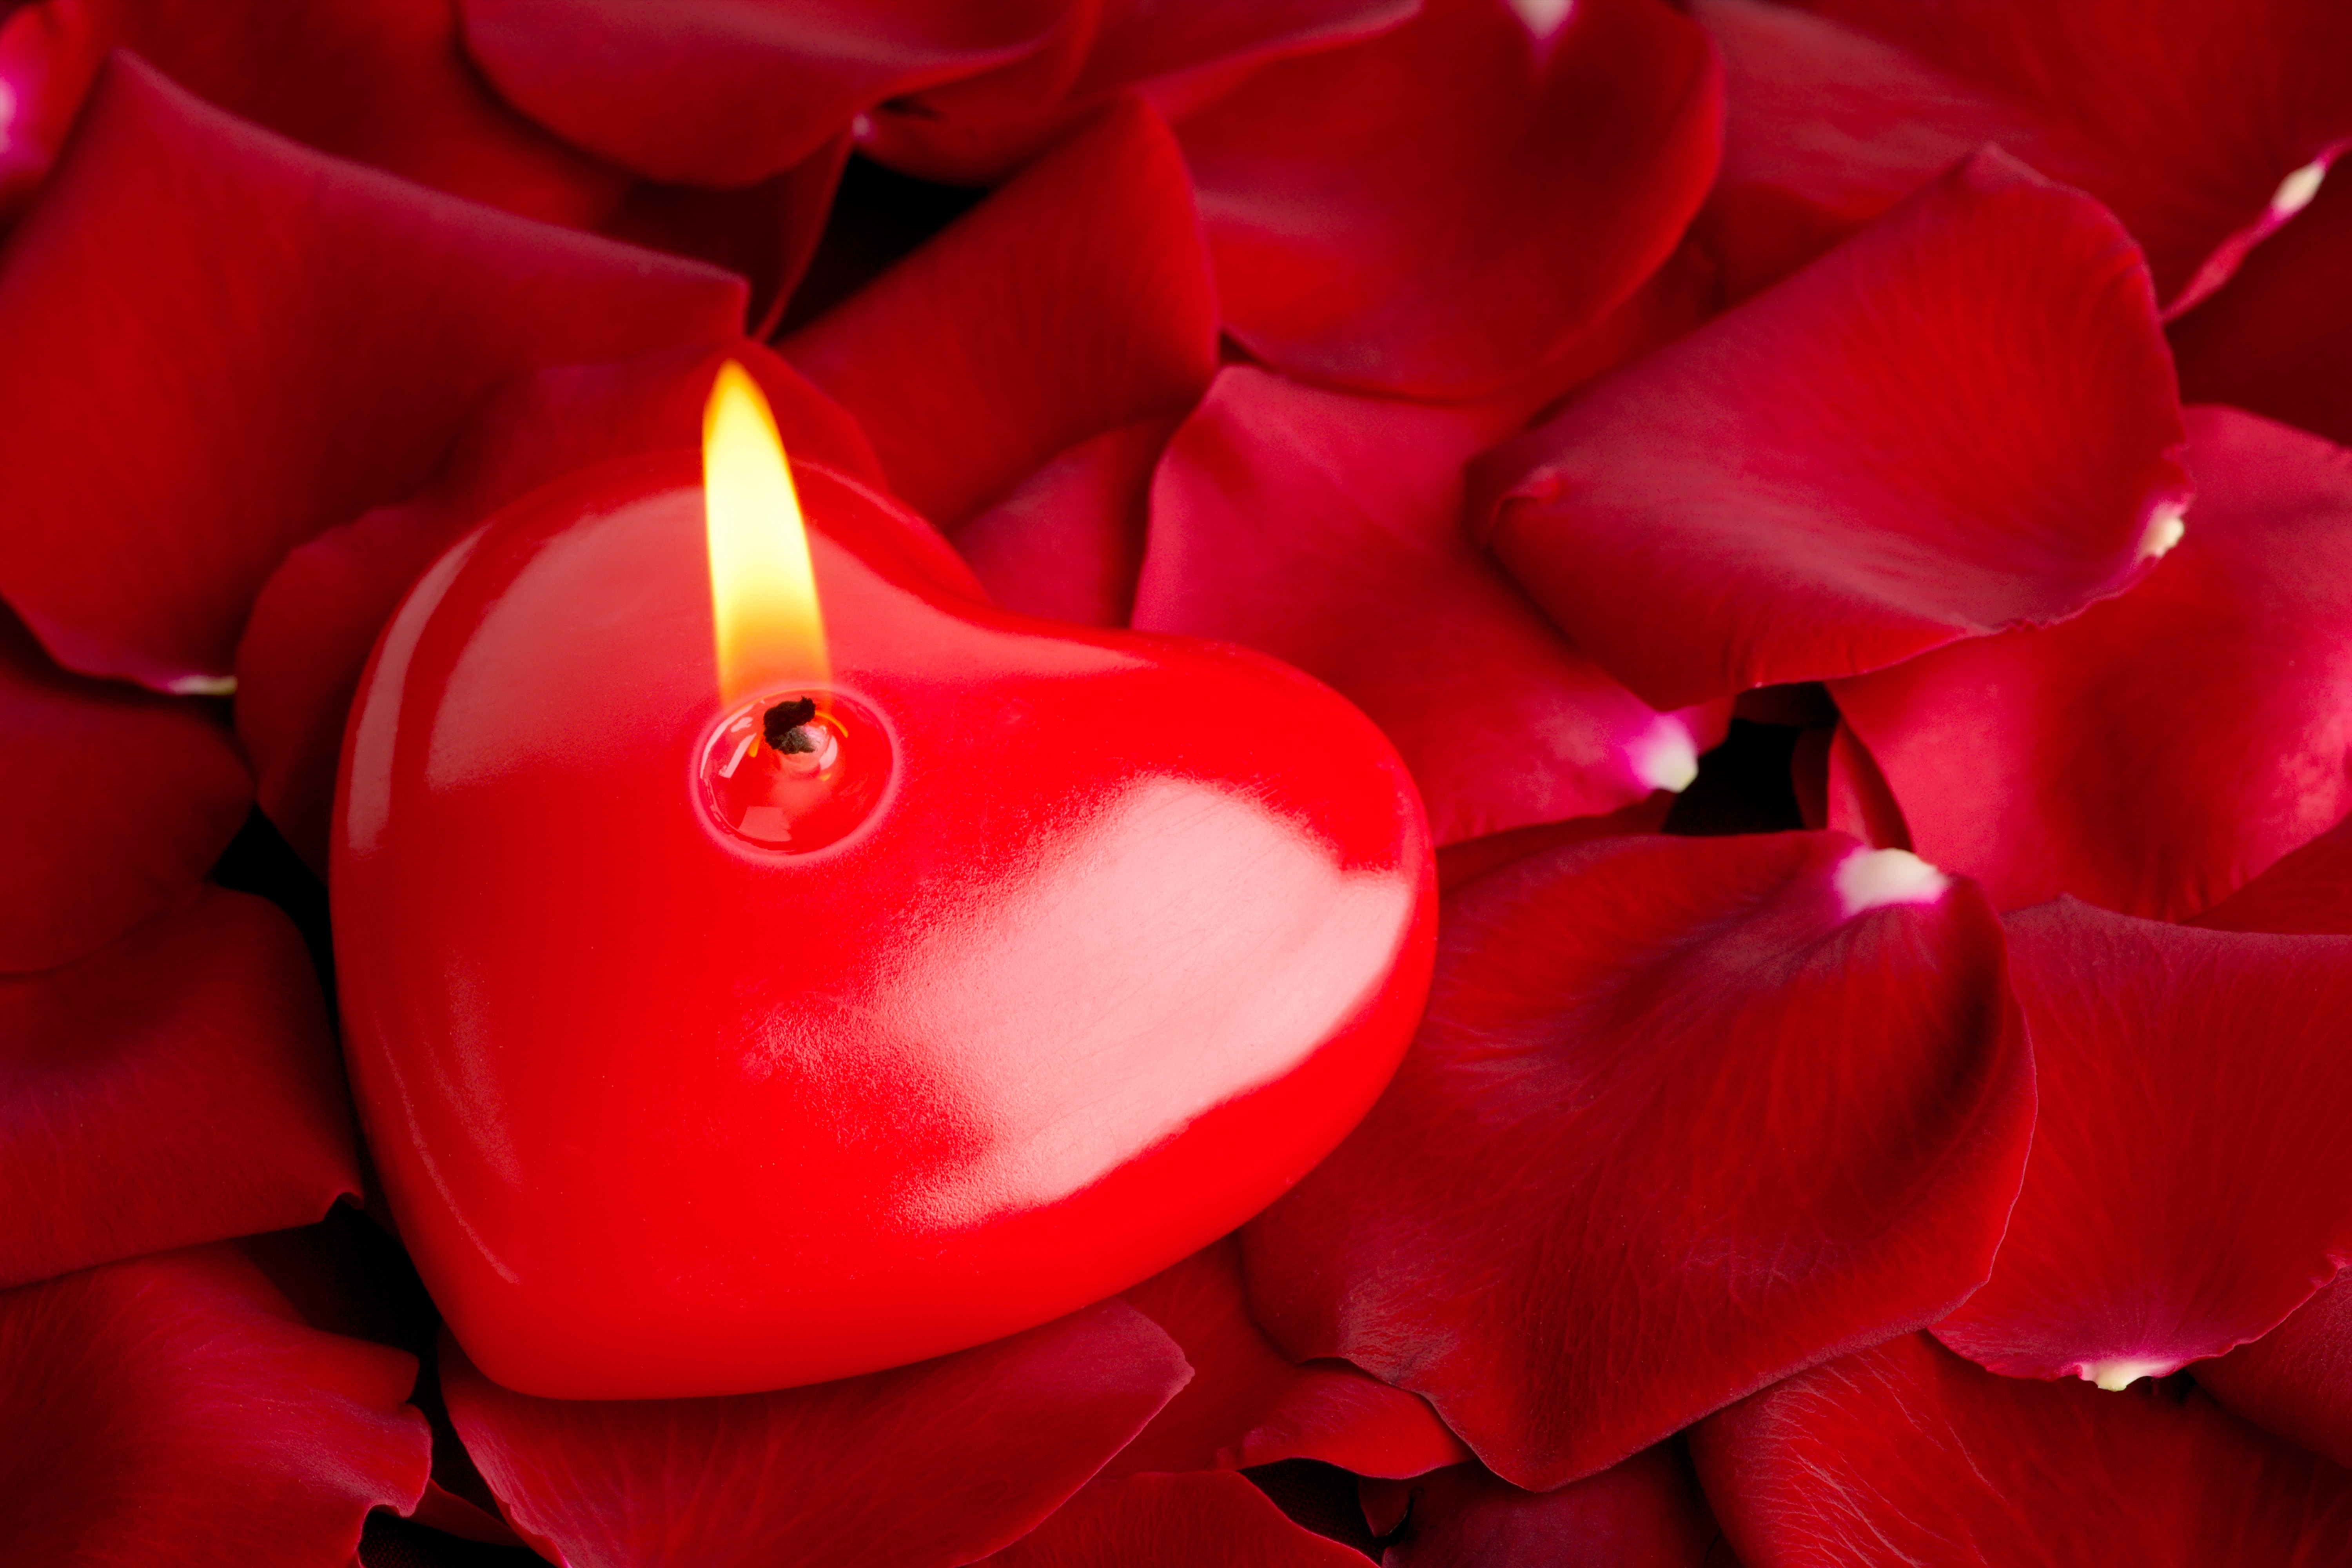 Heart Candle and Rose Petals Background | Gallery Yopriceville ...